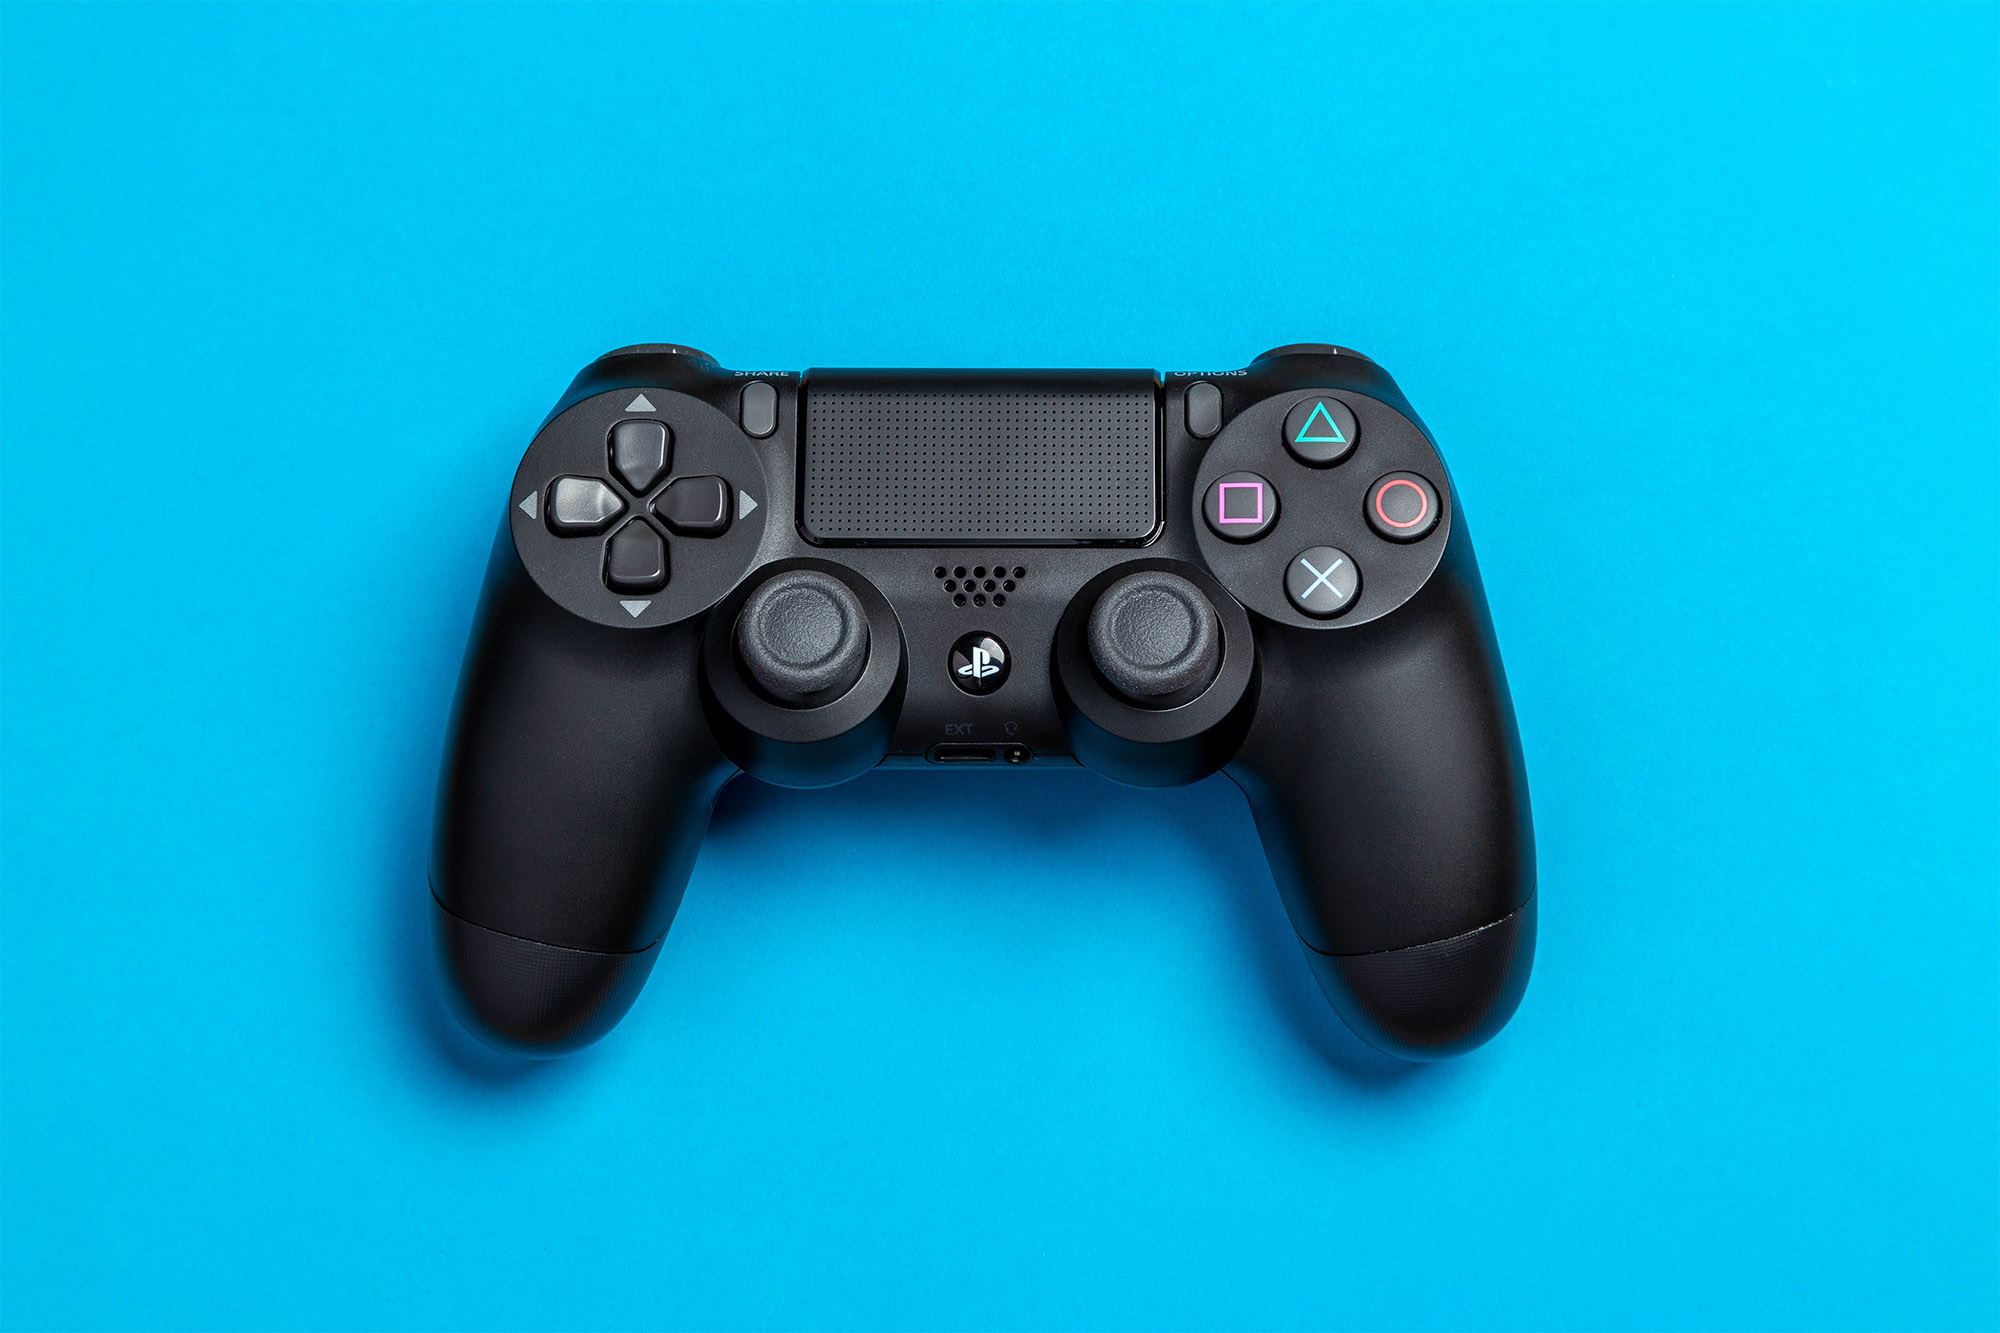 How to sync a PS4 controller | Digital Trends